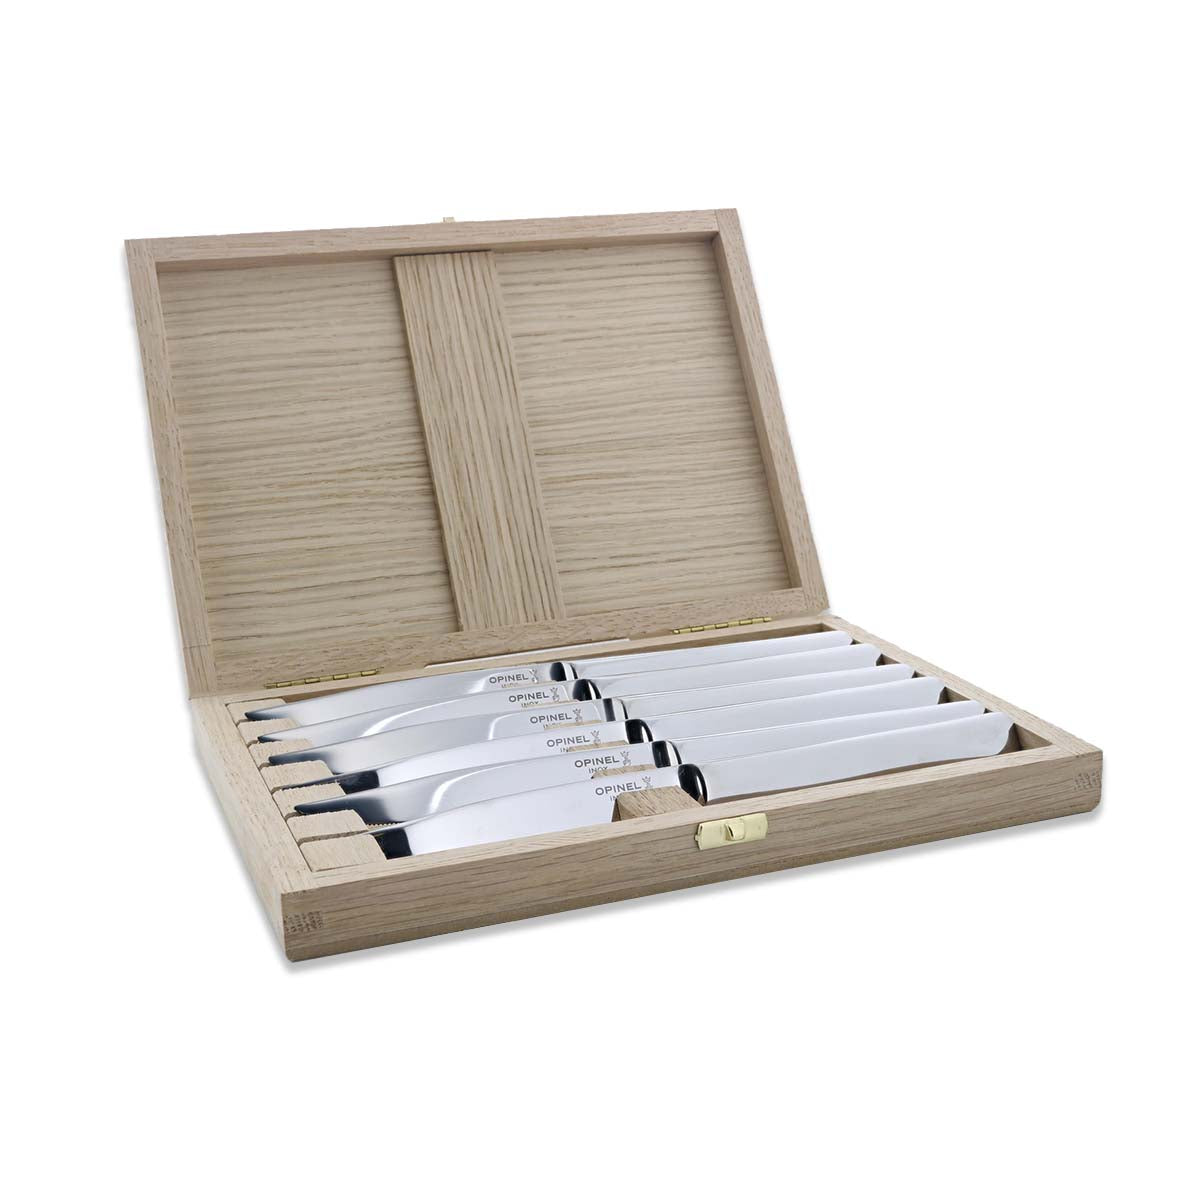 6-Pc. Table Knife Set in Gift Box